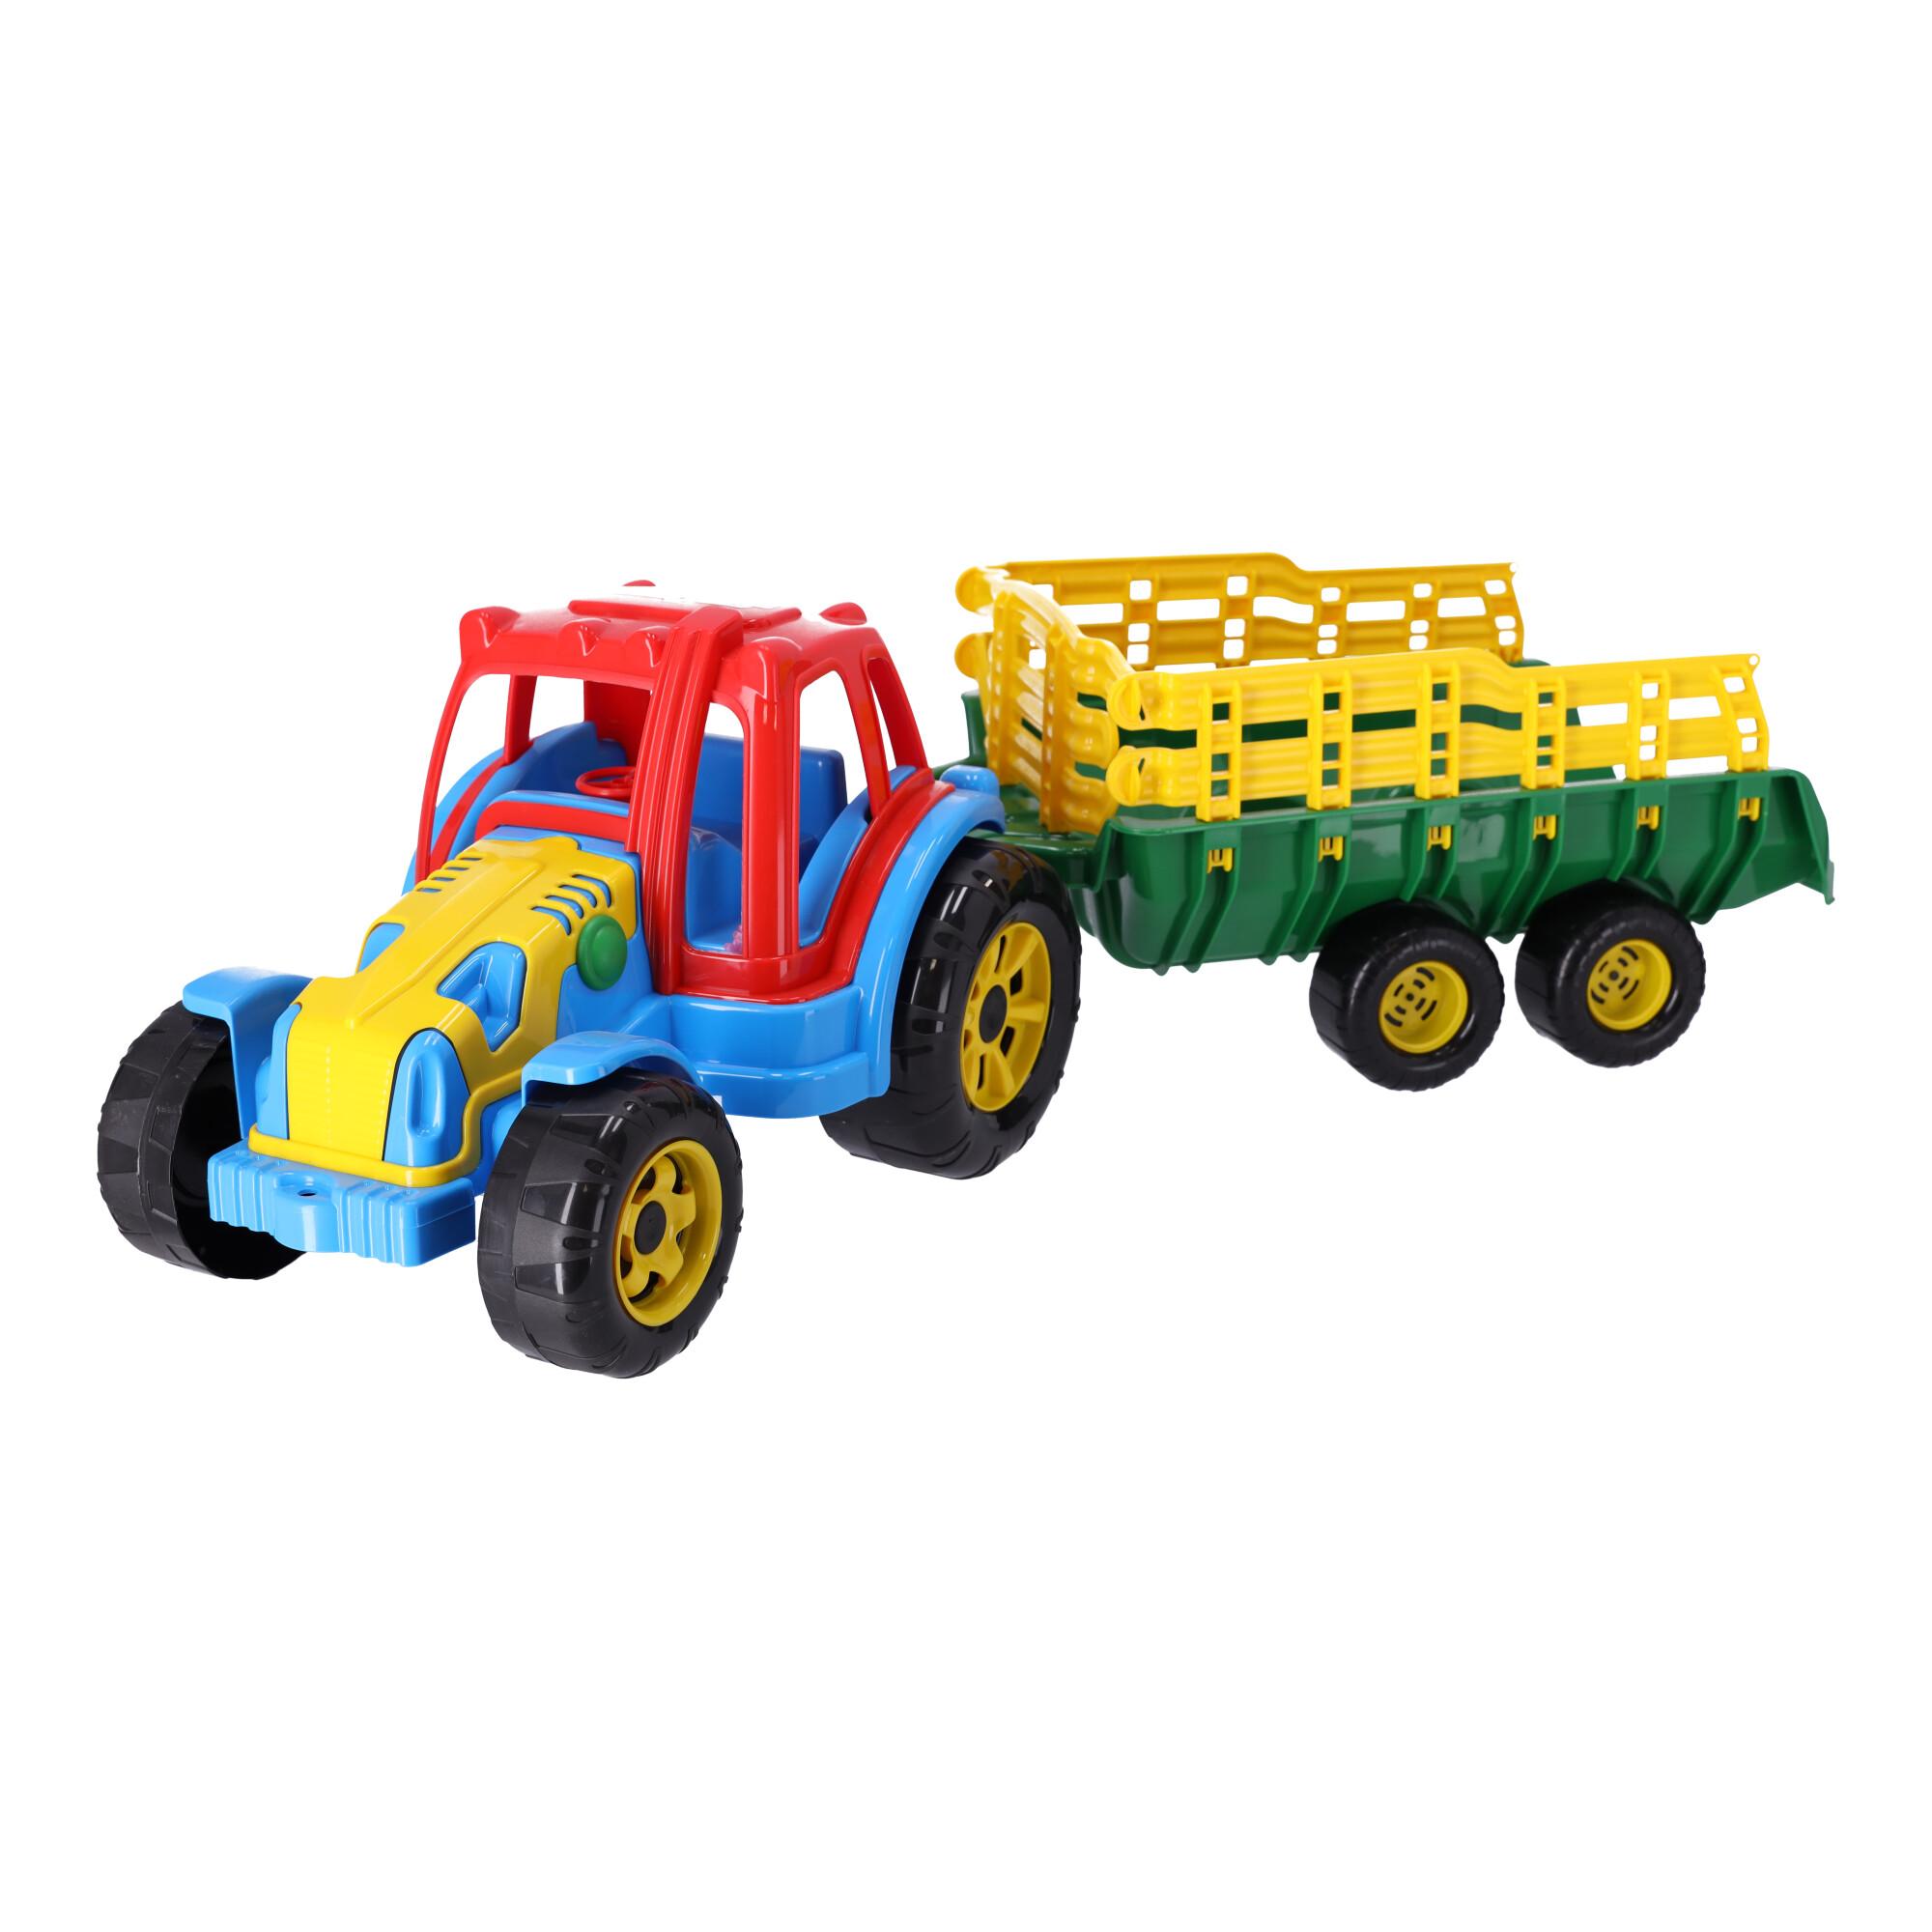 Tractor with trailer - model 299